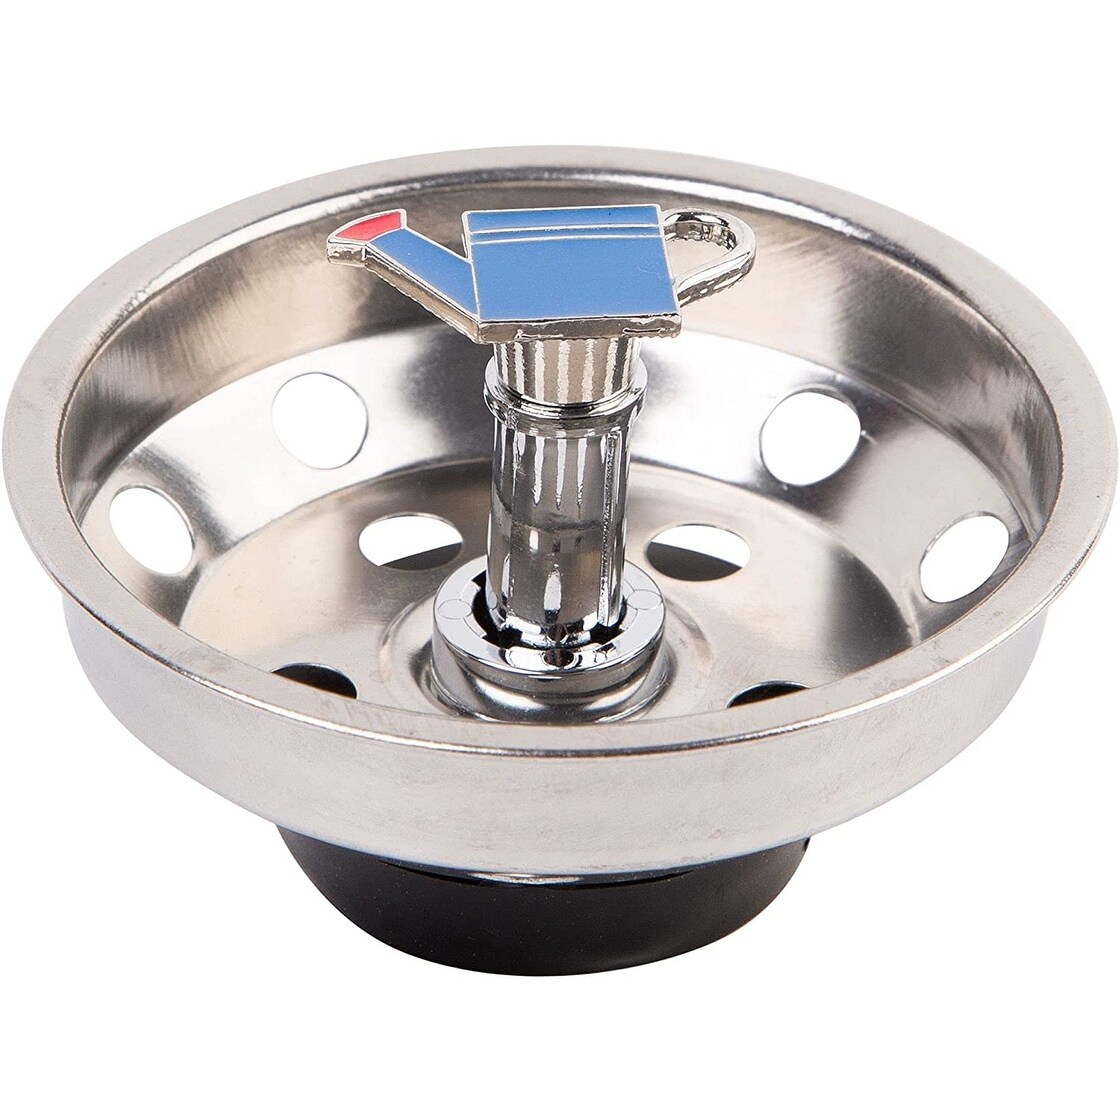 https://ak1.ostkcdn.com/images/products/is/images/direct/03287586188e561586421cd6cc53c640a7dbbca0/Kitchen-Sink-Strainer-for-Standard-Drains---Drain-Stopper-With-Fun-Finish.jpg